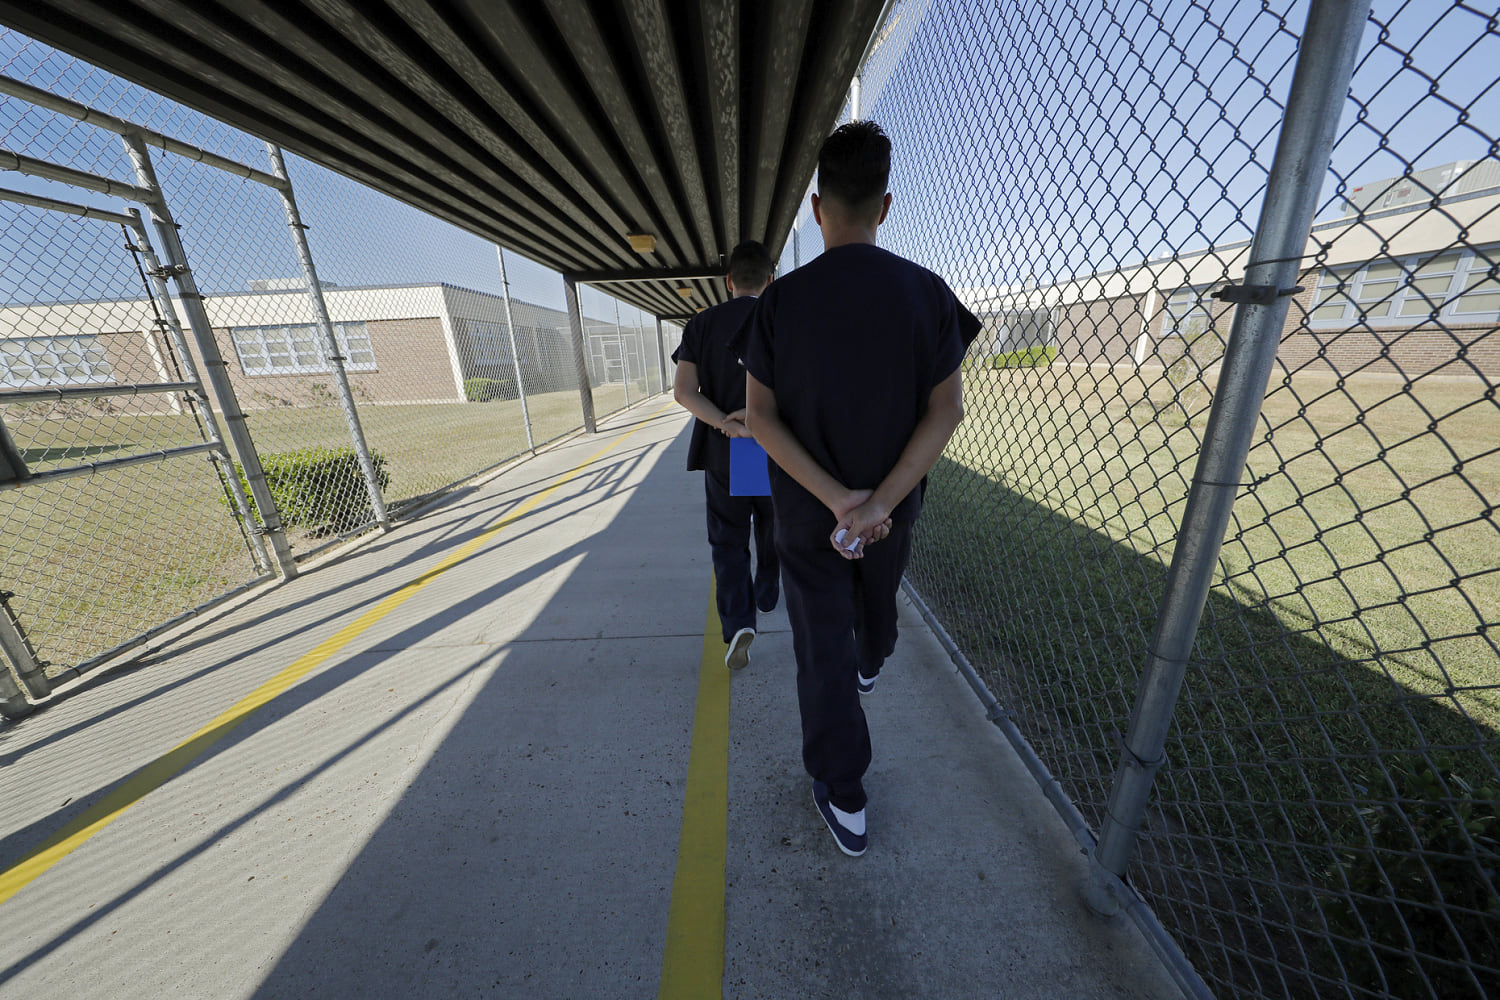 The number of deaths in ICE custody is already more than double all of last year